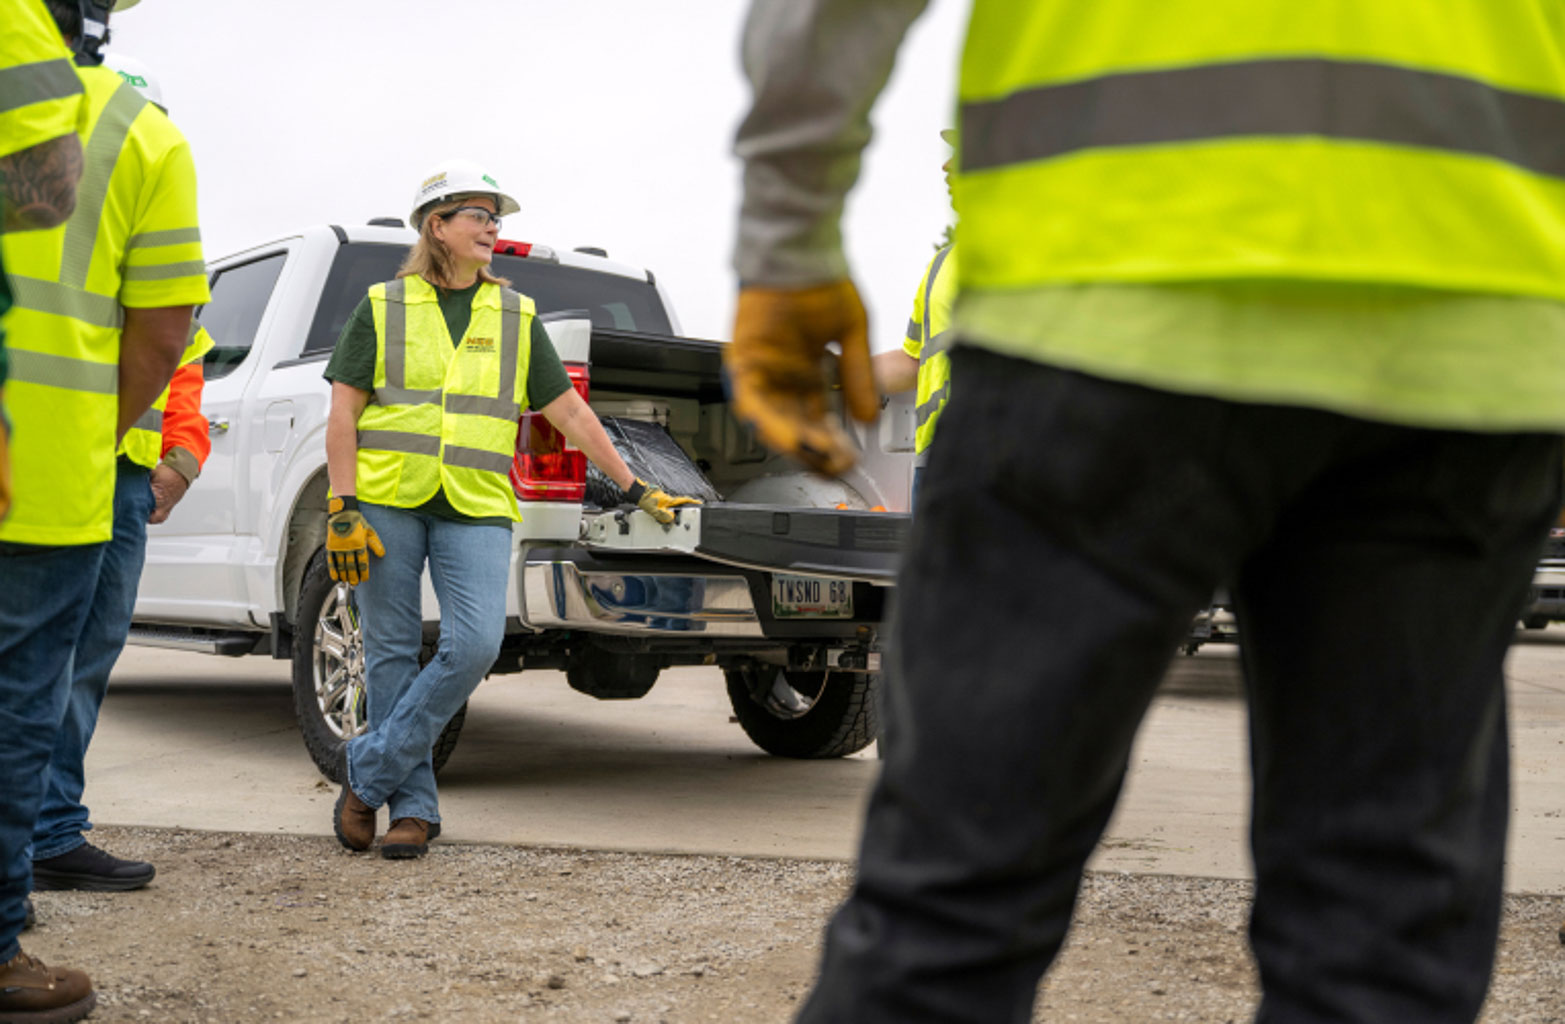 An NG Gilbert crew member leans on a truck bed in discussion with another team member, who stands in the foreground.